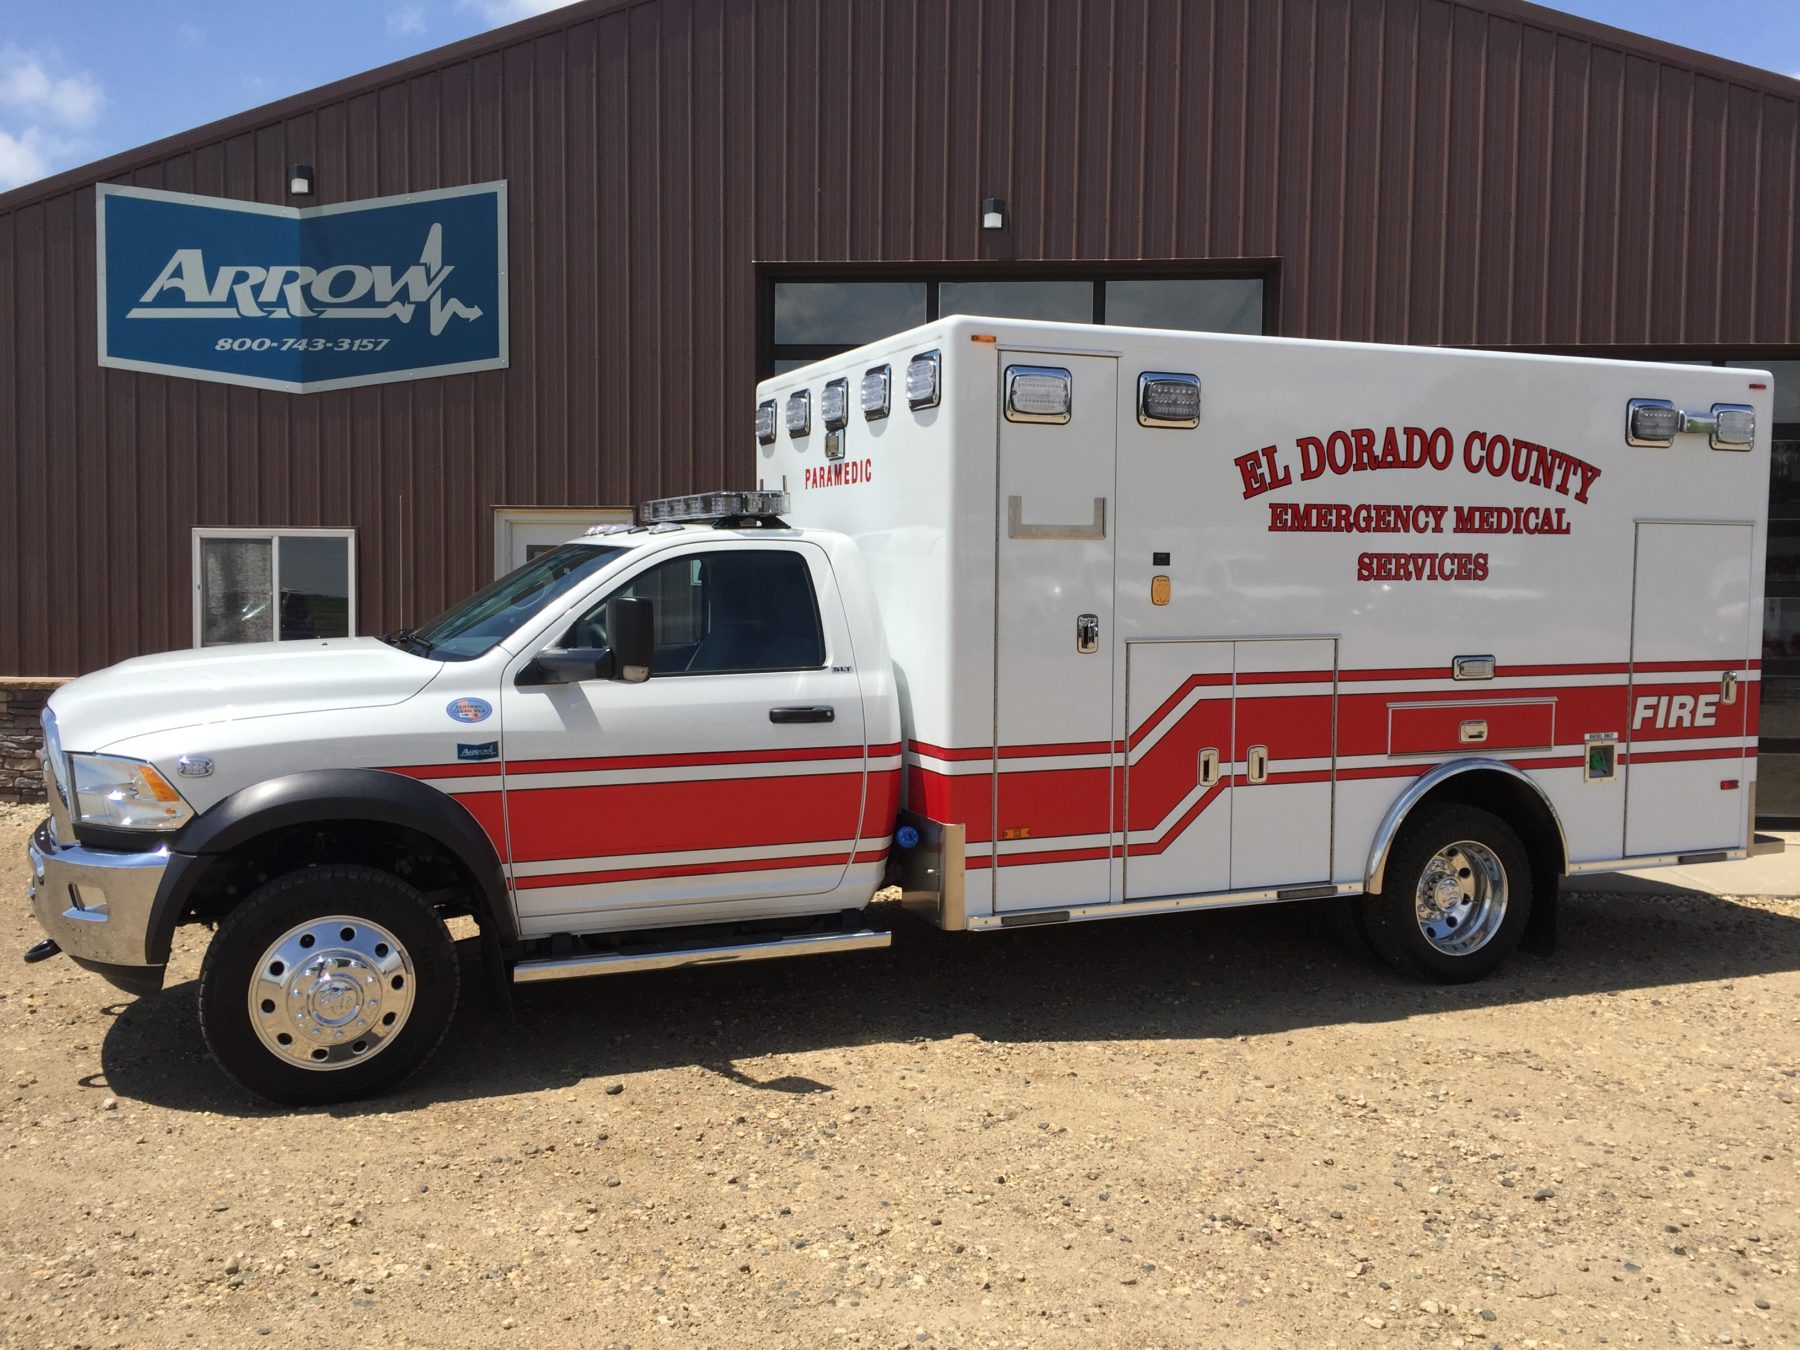 2017 Ram 4500 4x4 Heavy Duty Ambulance For Sale – Picture 1